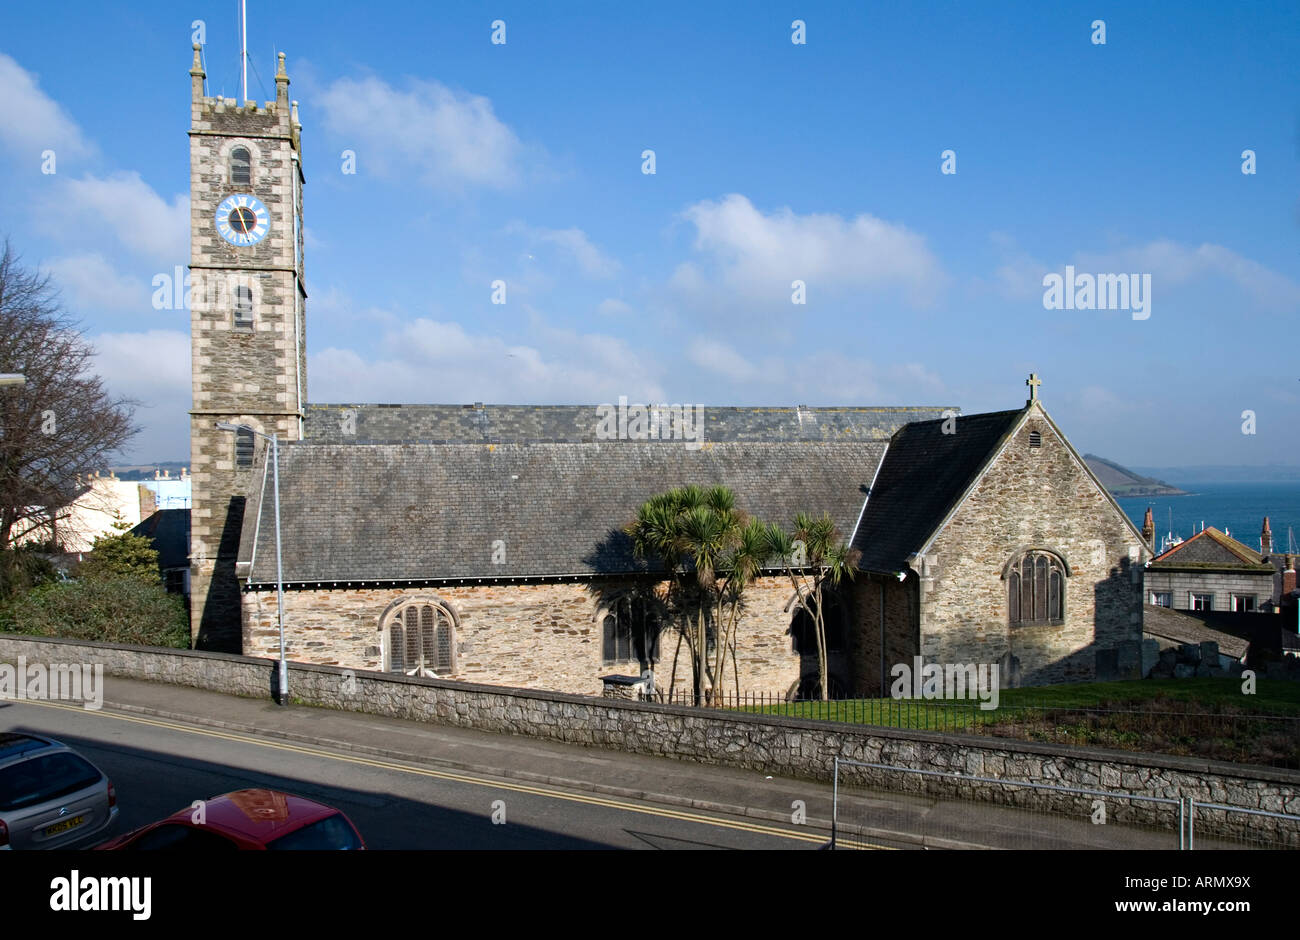 Falmouth, Cornwall, UK. The Church of King Charles the Martyr, 1665, with Carrick Roads (the River Fal estuary) in the background Stock Photo